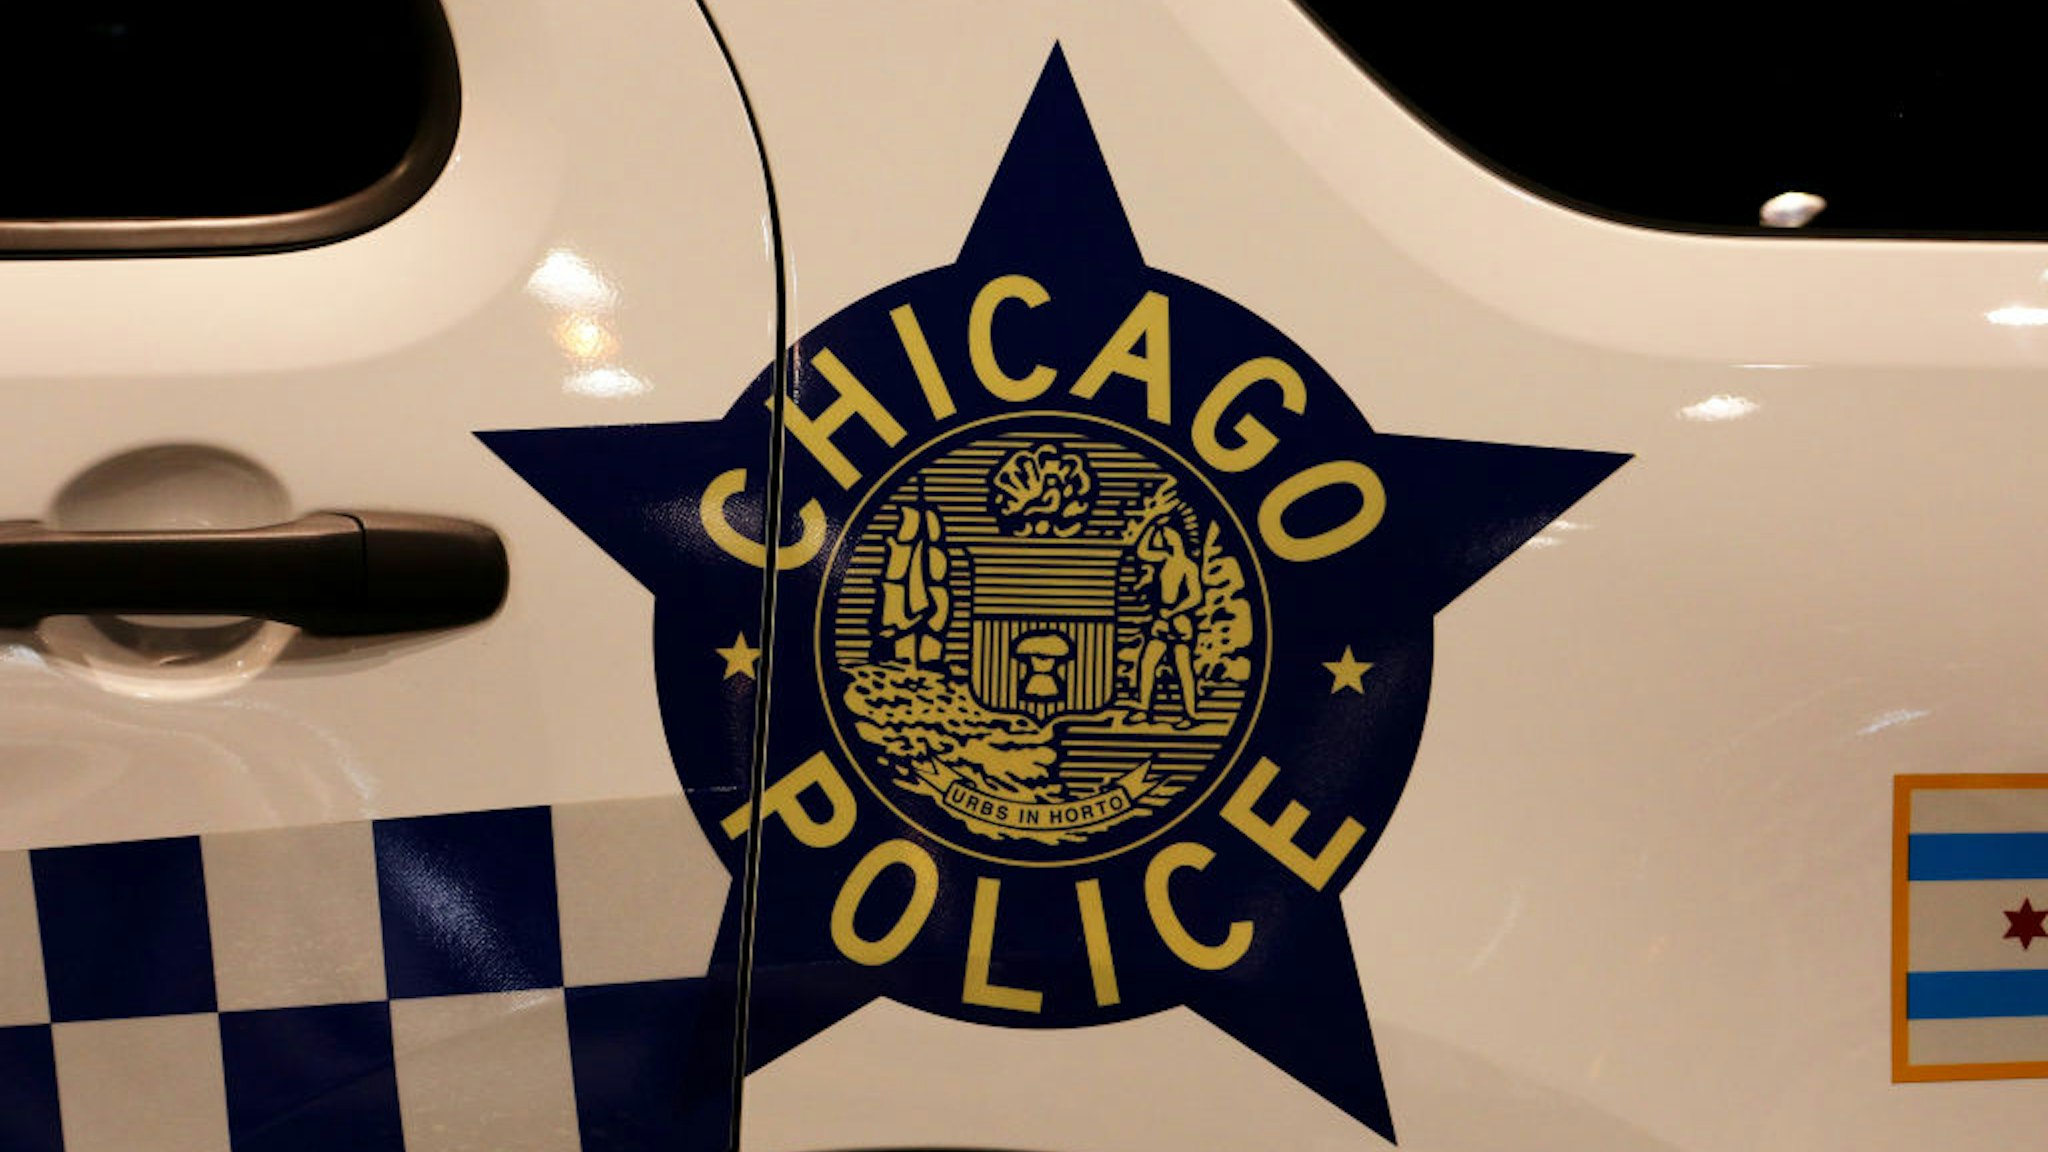 A Chicago Police decal on a Chicago Police vehicle is on display at the 112th Annual Chicago Auto Show at McCormick Place in Chicago, Illinois on February 6, 2020. (Photo By Raymond Boyd/Getty Images)"n